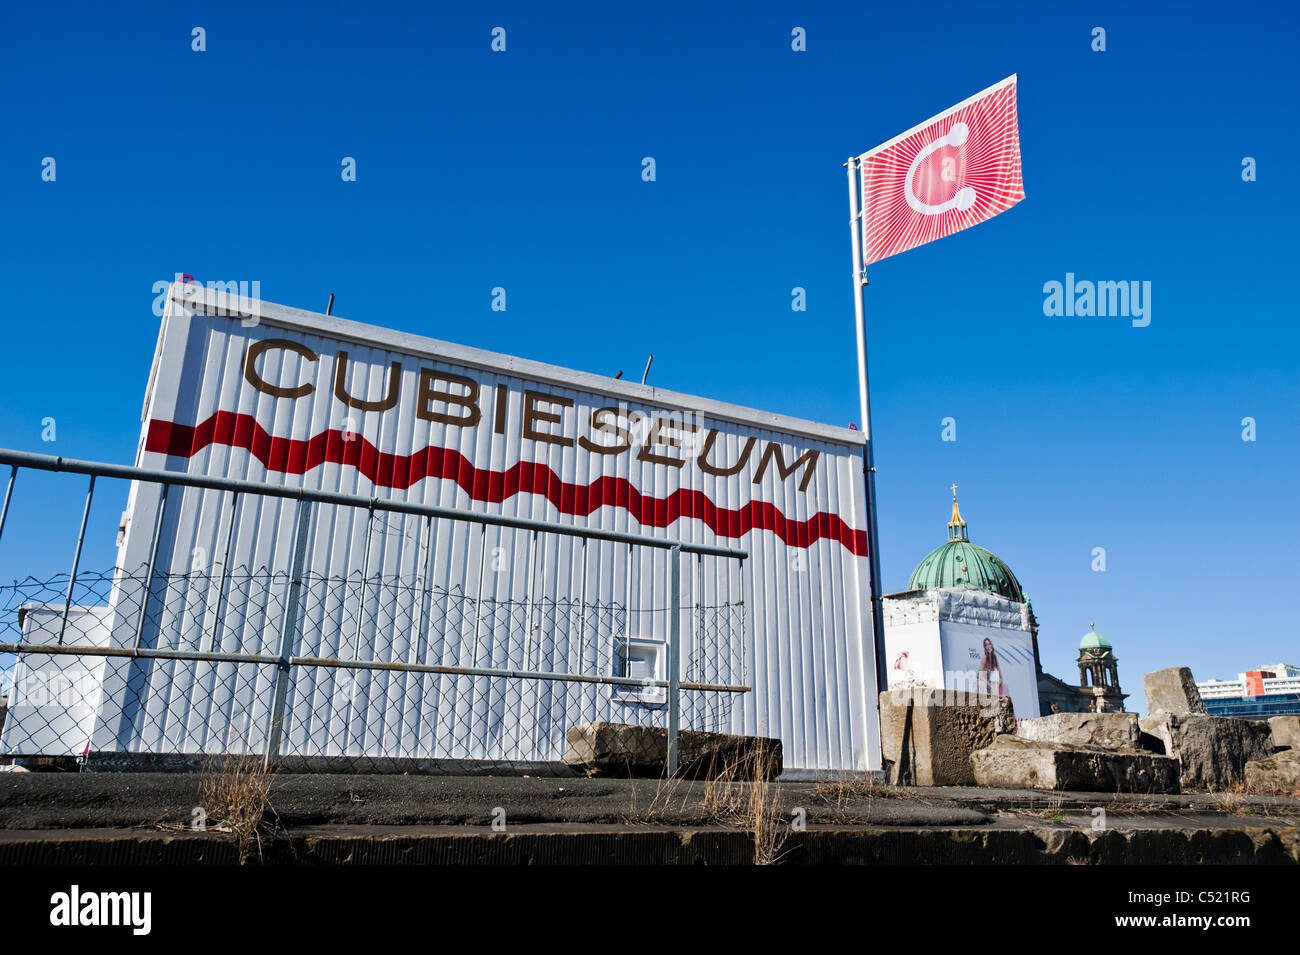 Cubieseum, an art container on Schlossplatz square, Berlin, Germany, Europe Stock Photo